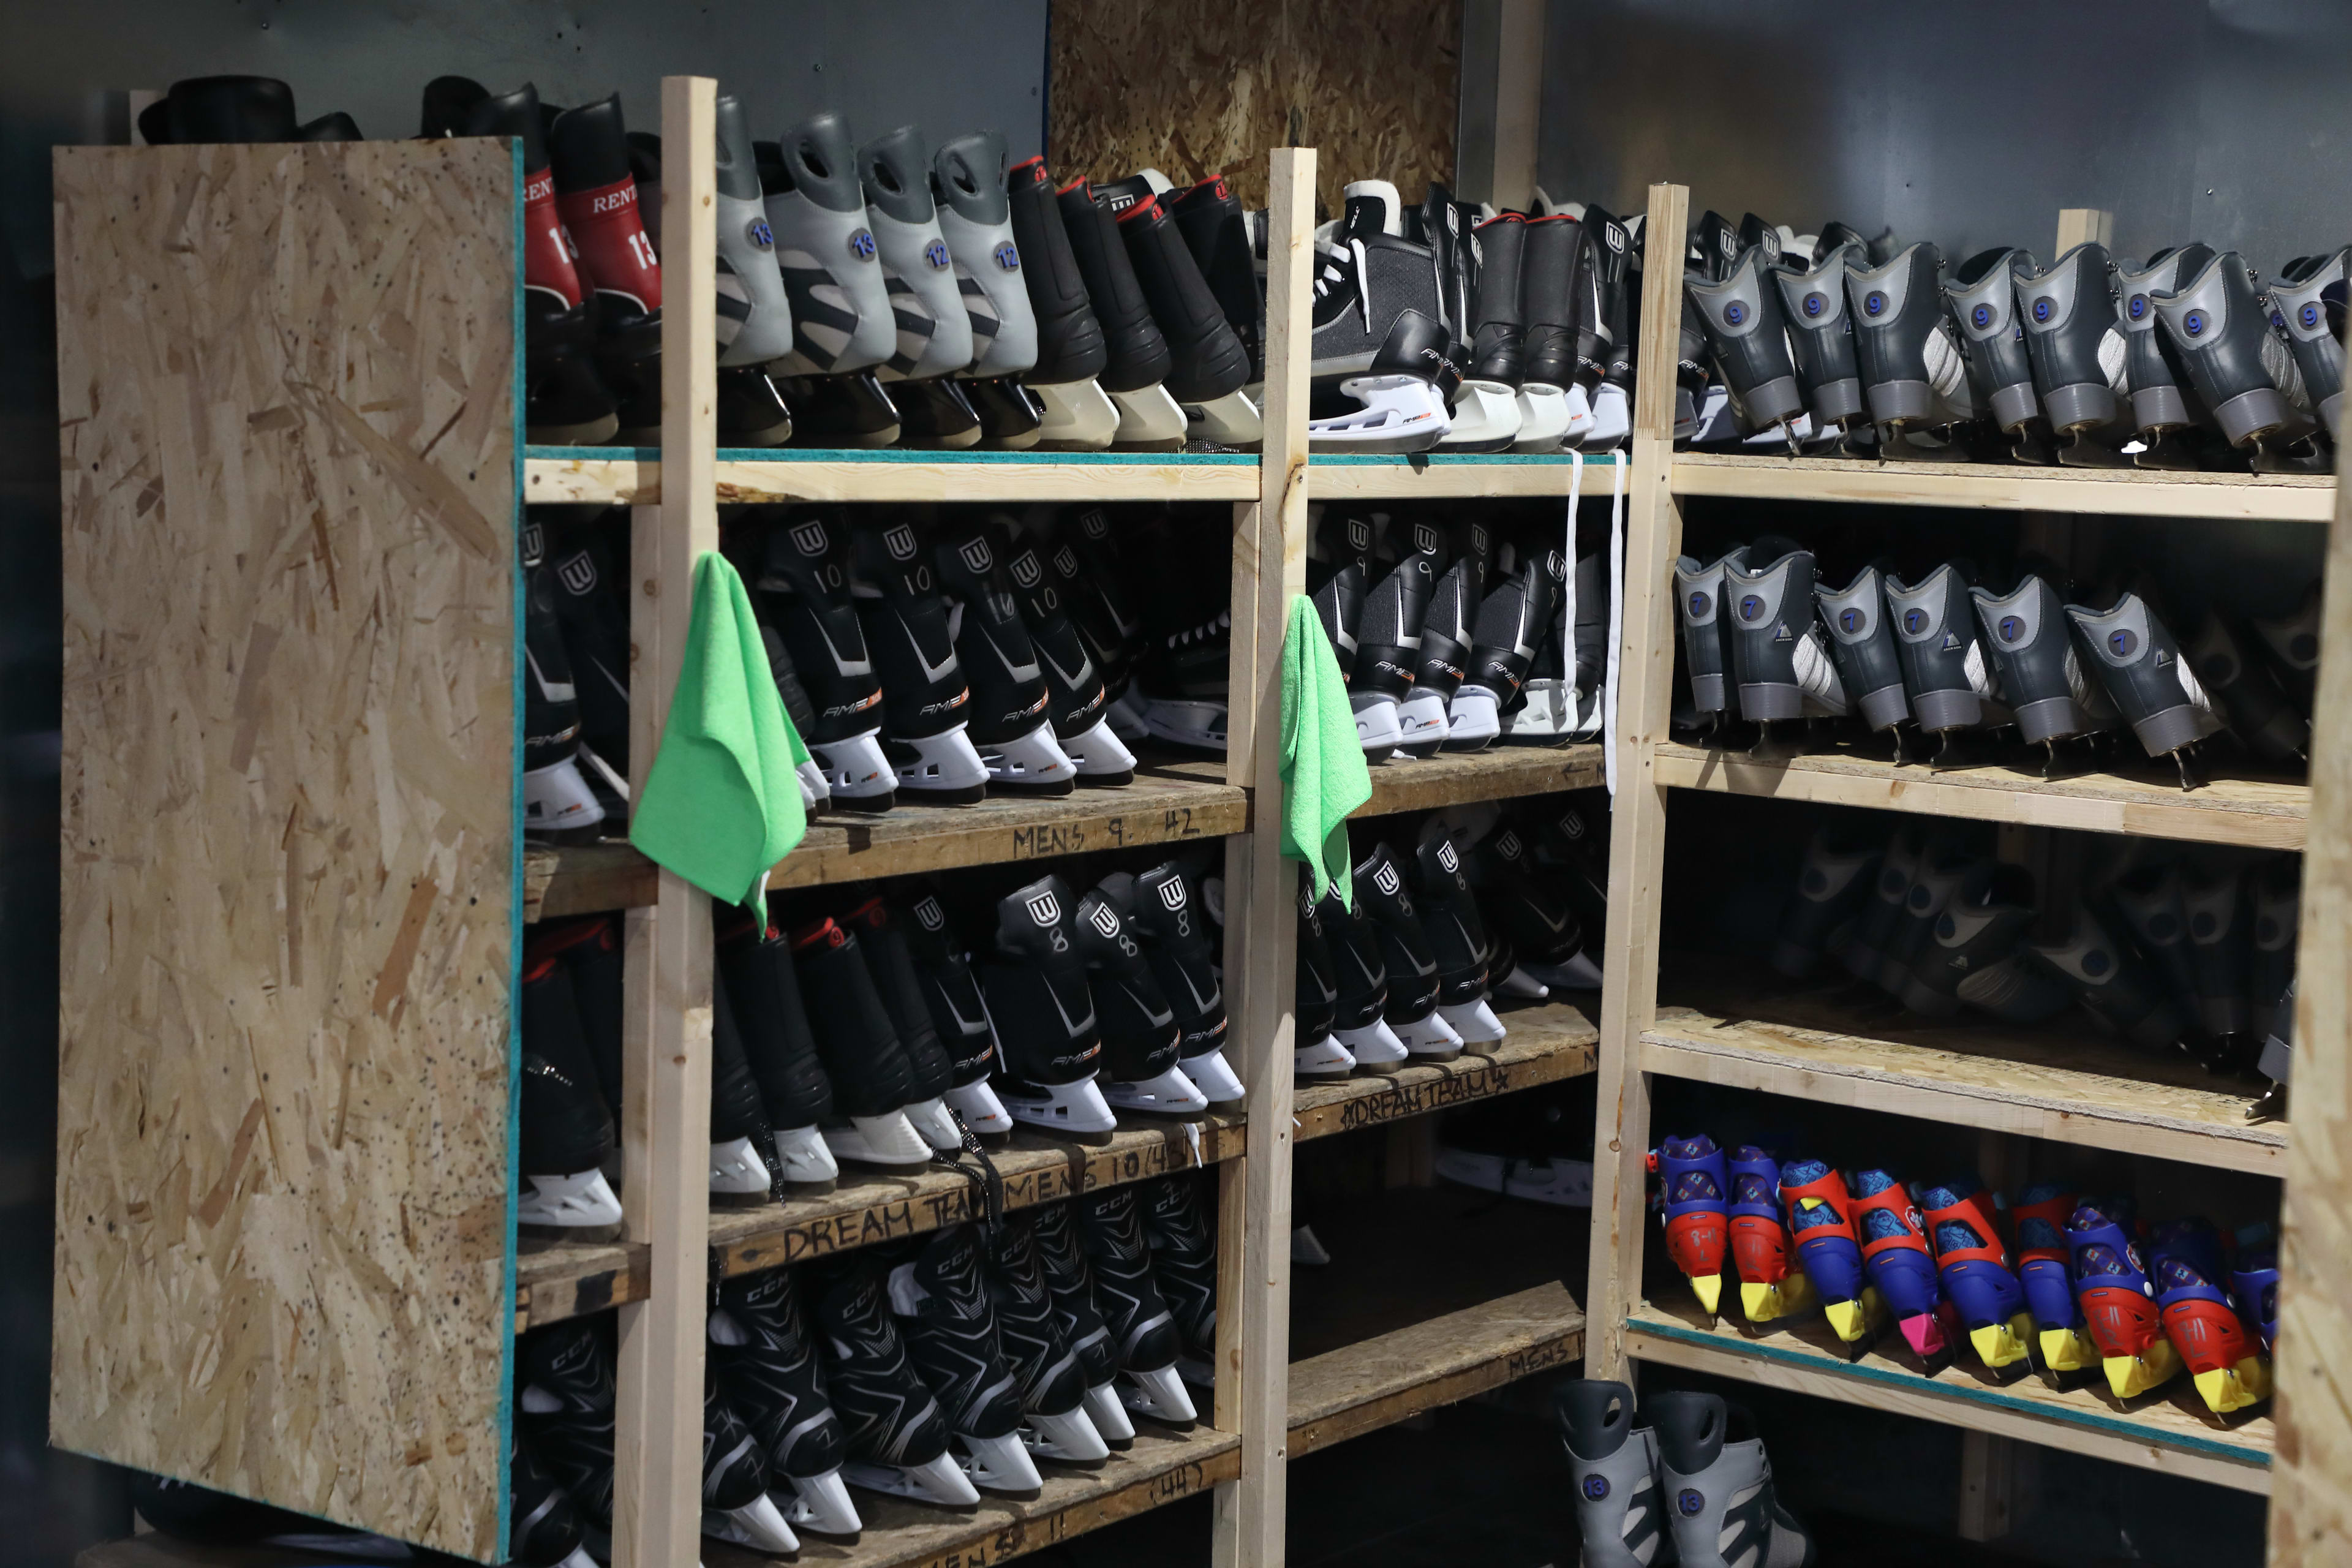 Ice skates on shelves, ready to be rented